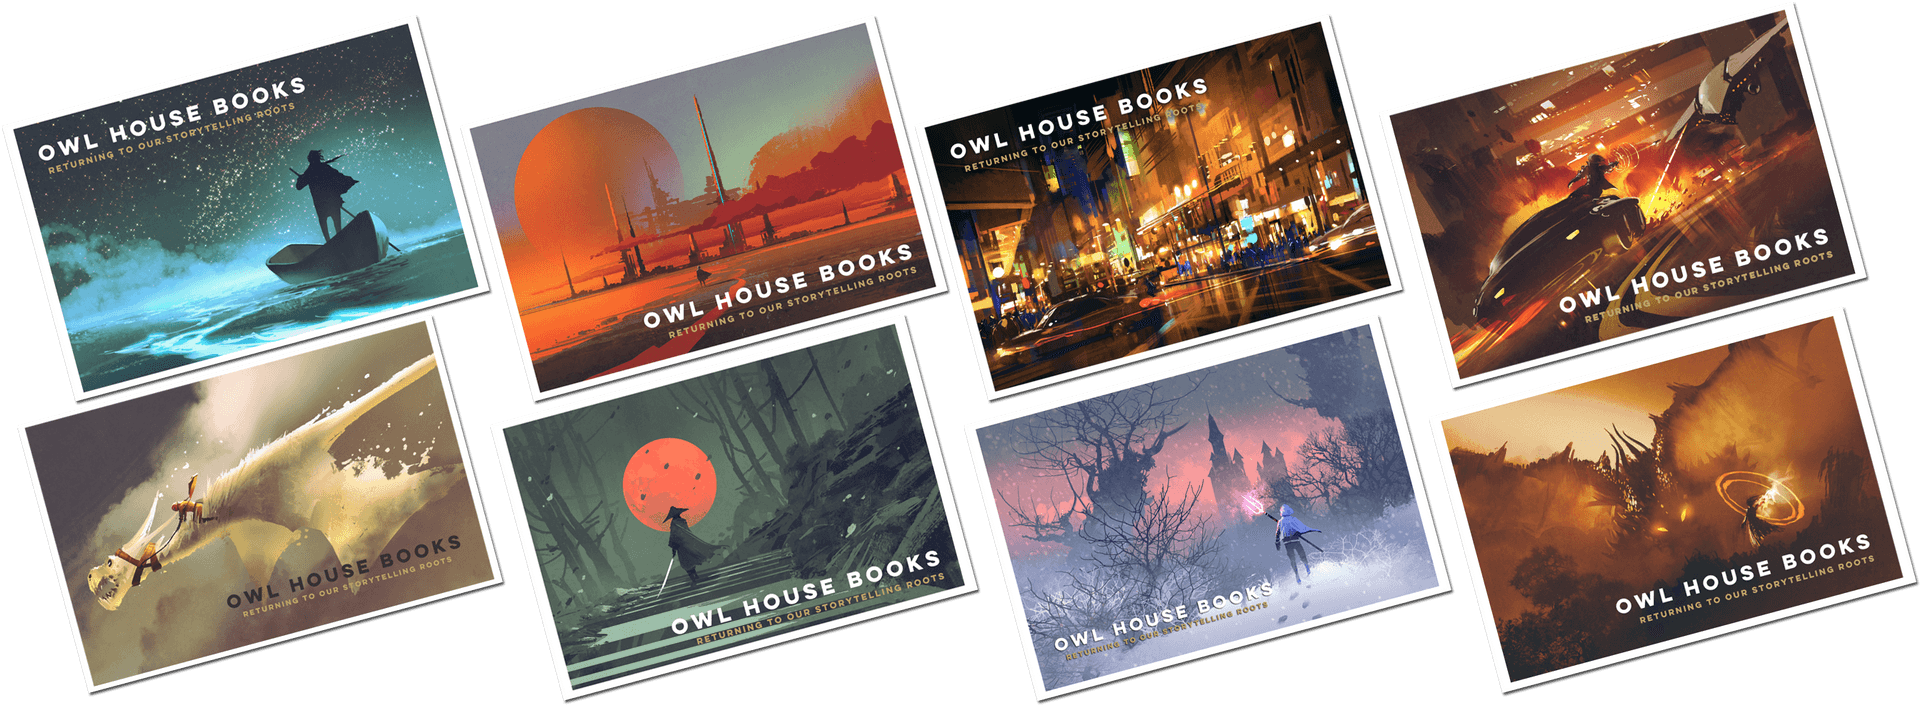 Owl House Books Postcard Collection PNG image